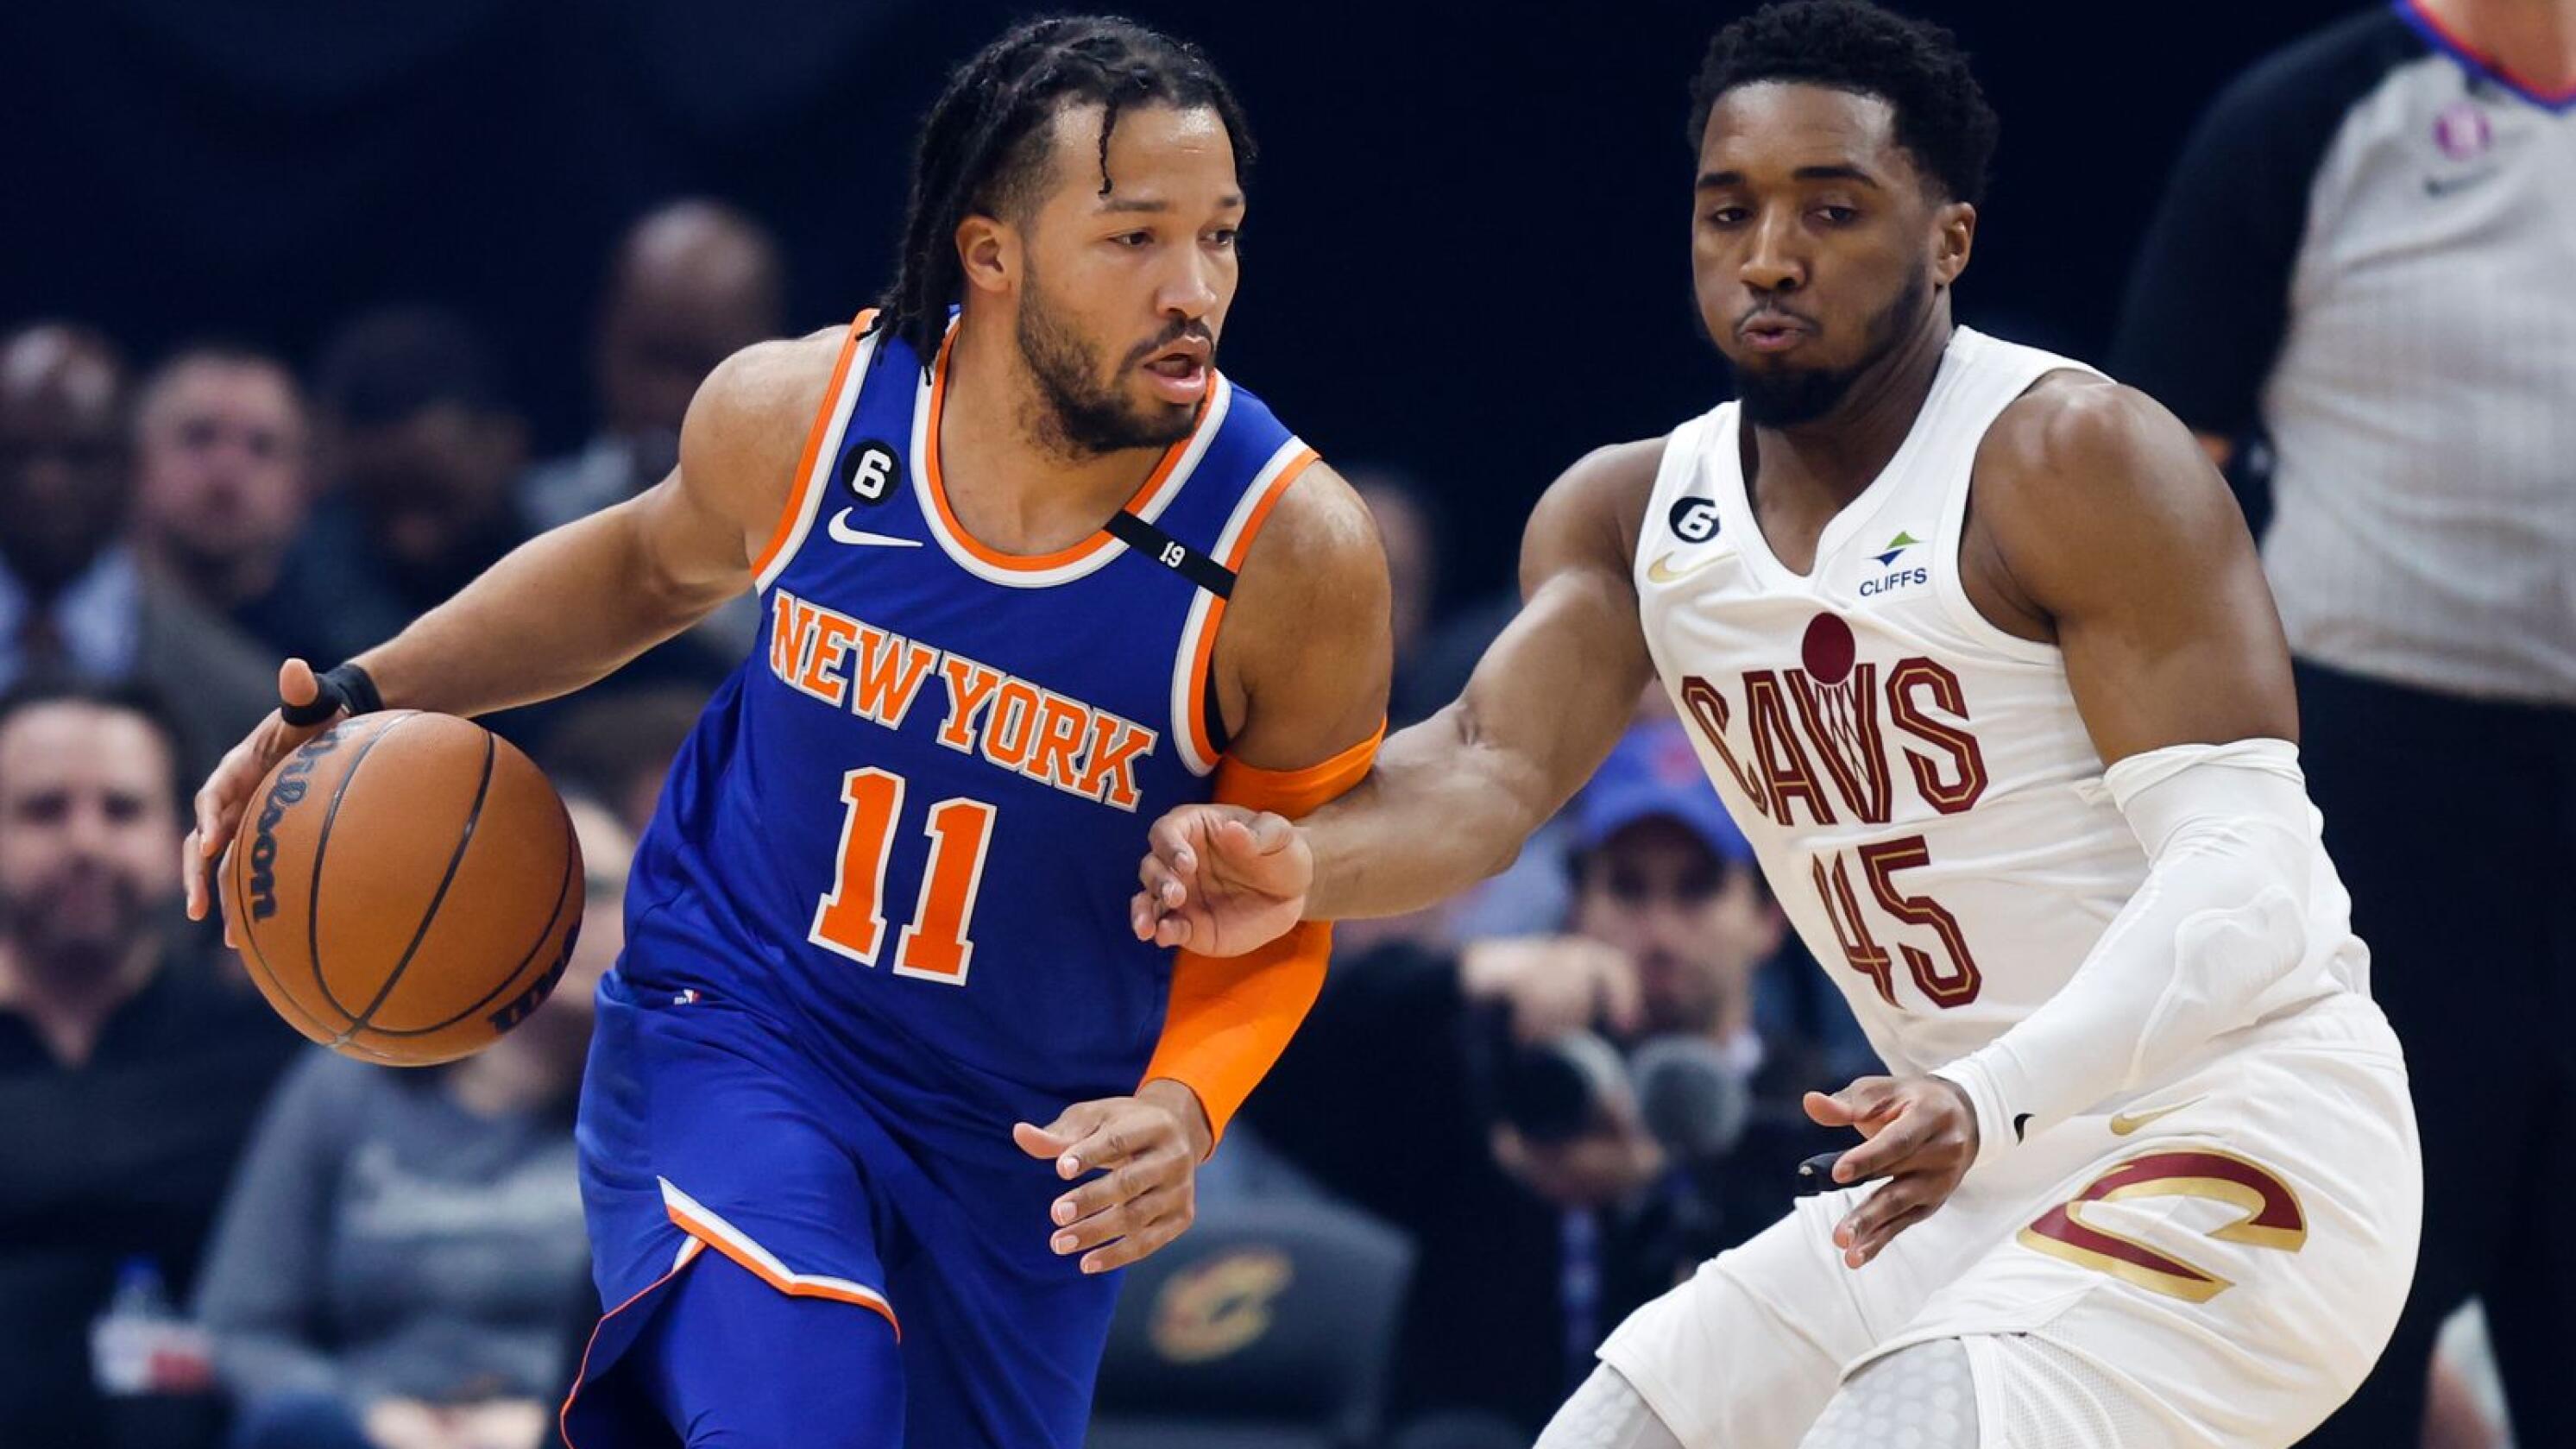 Knicks: The Knicks are legitimate contenders and we should talk about them  like it